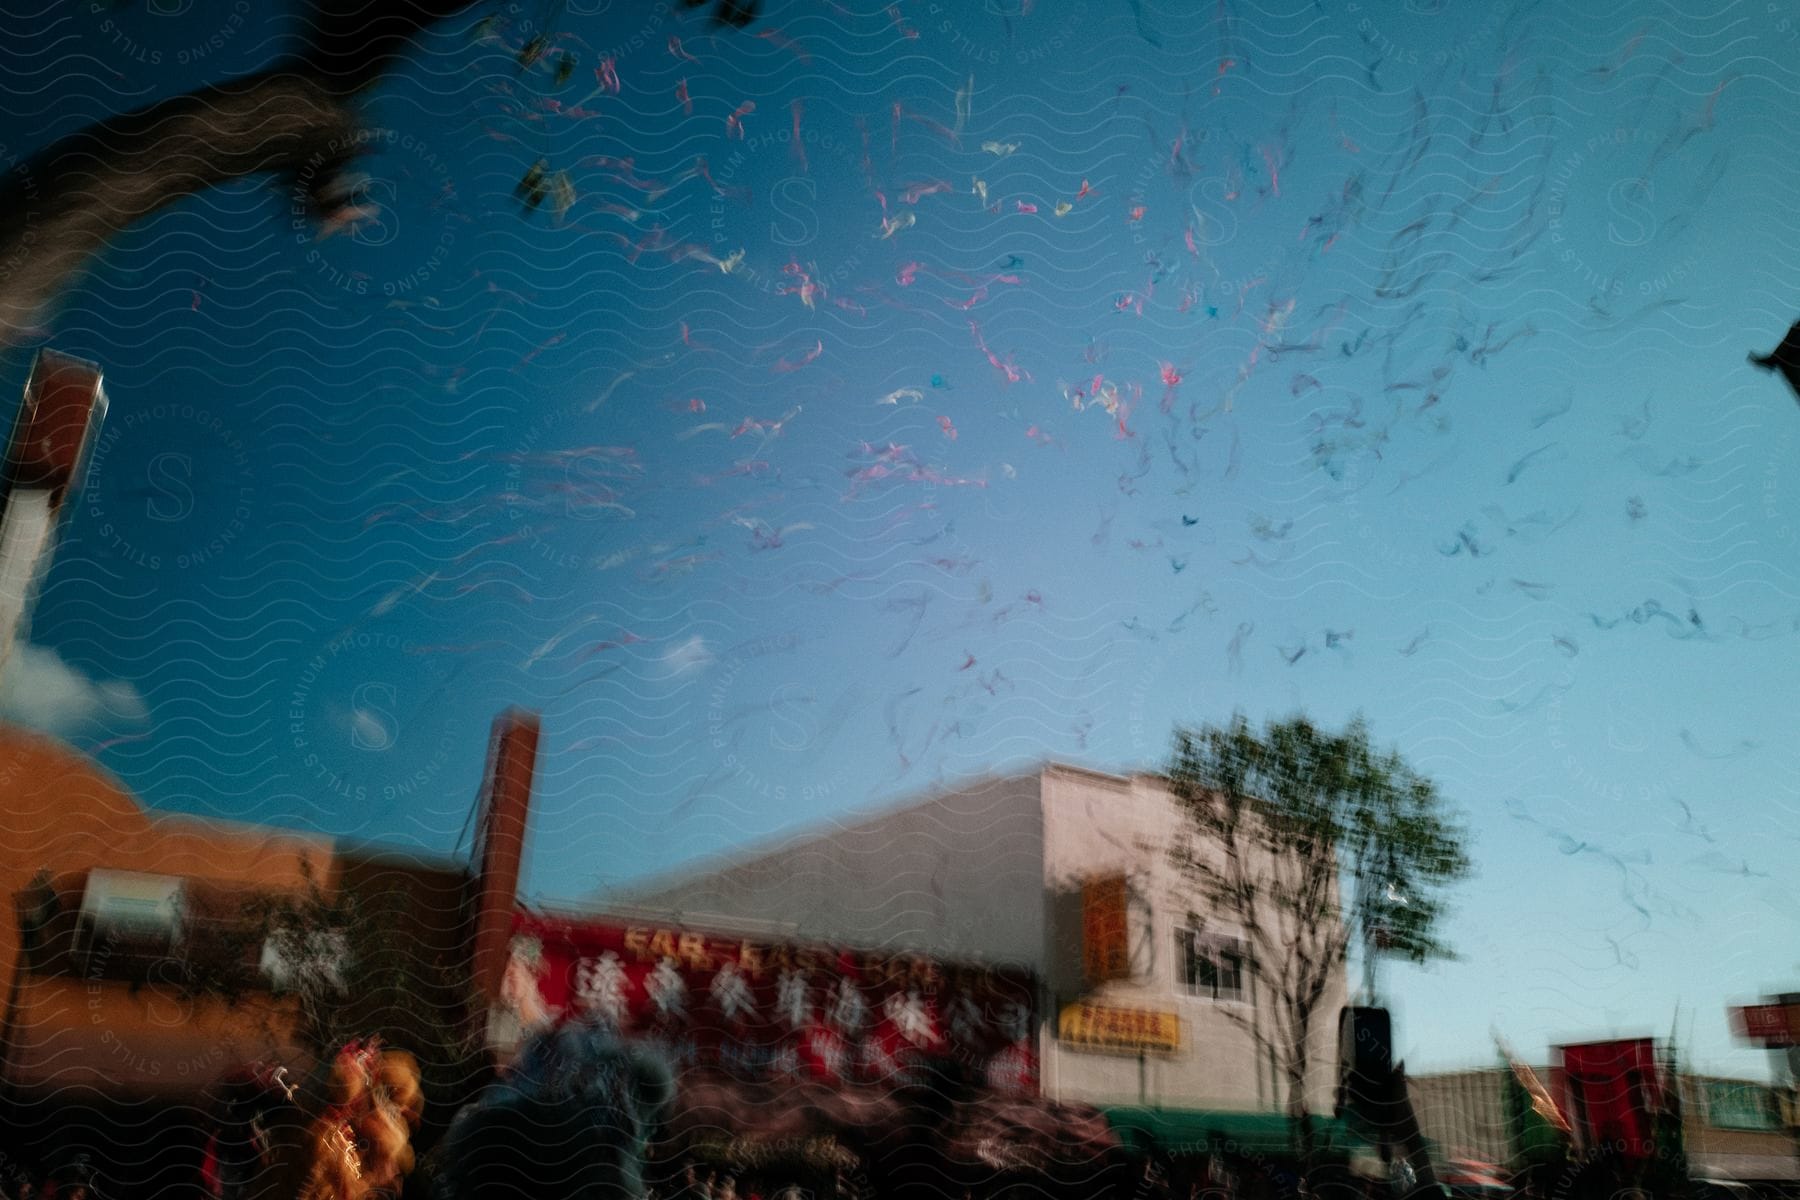 An evening scene in a community with particles floating in the air